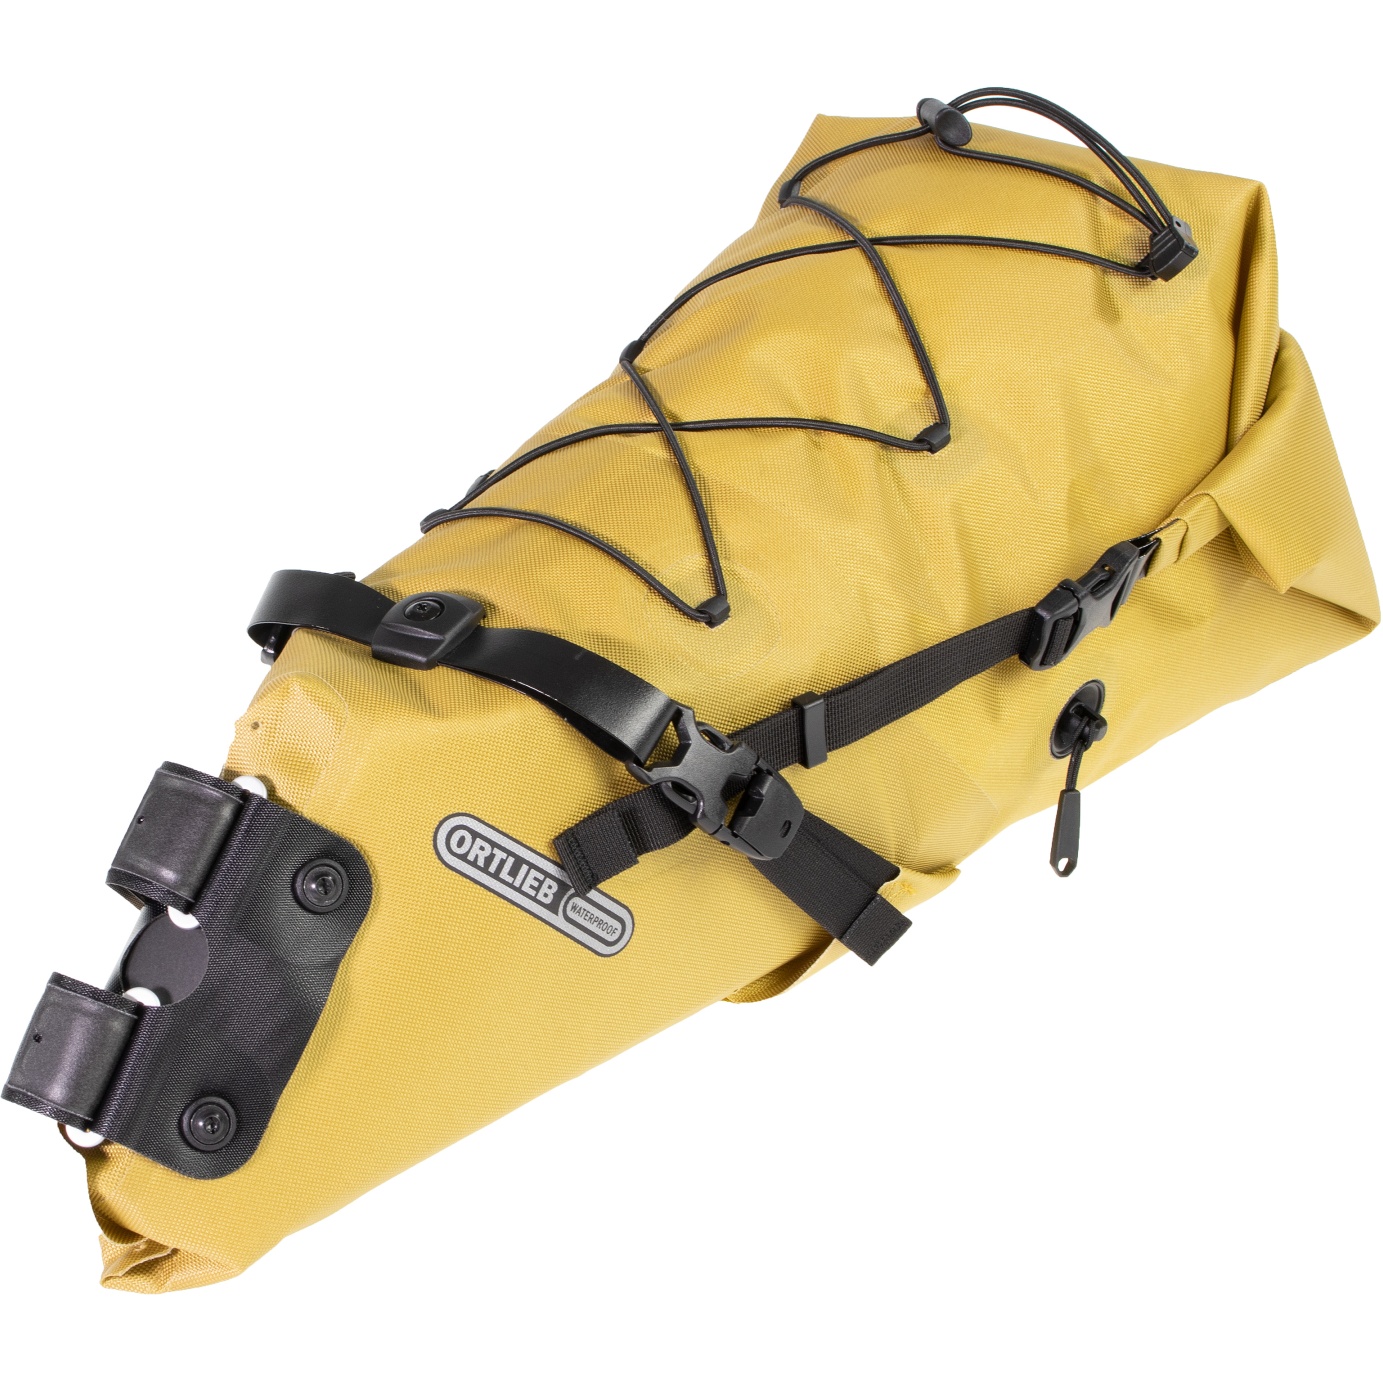 Picture of ORTLIEB Seat-Pack Saddle Bag - 16.5L - Limited Edition - Mustard